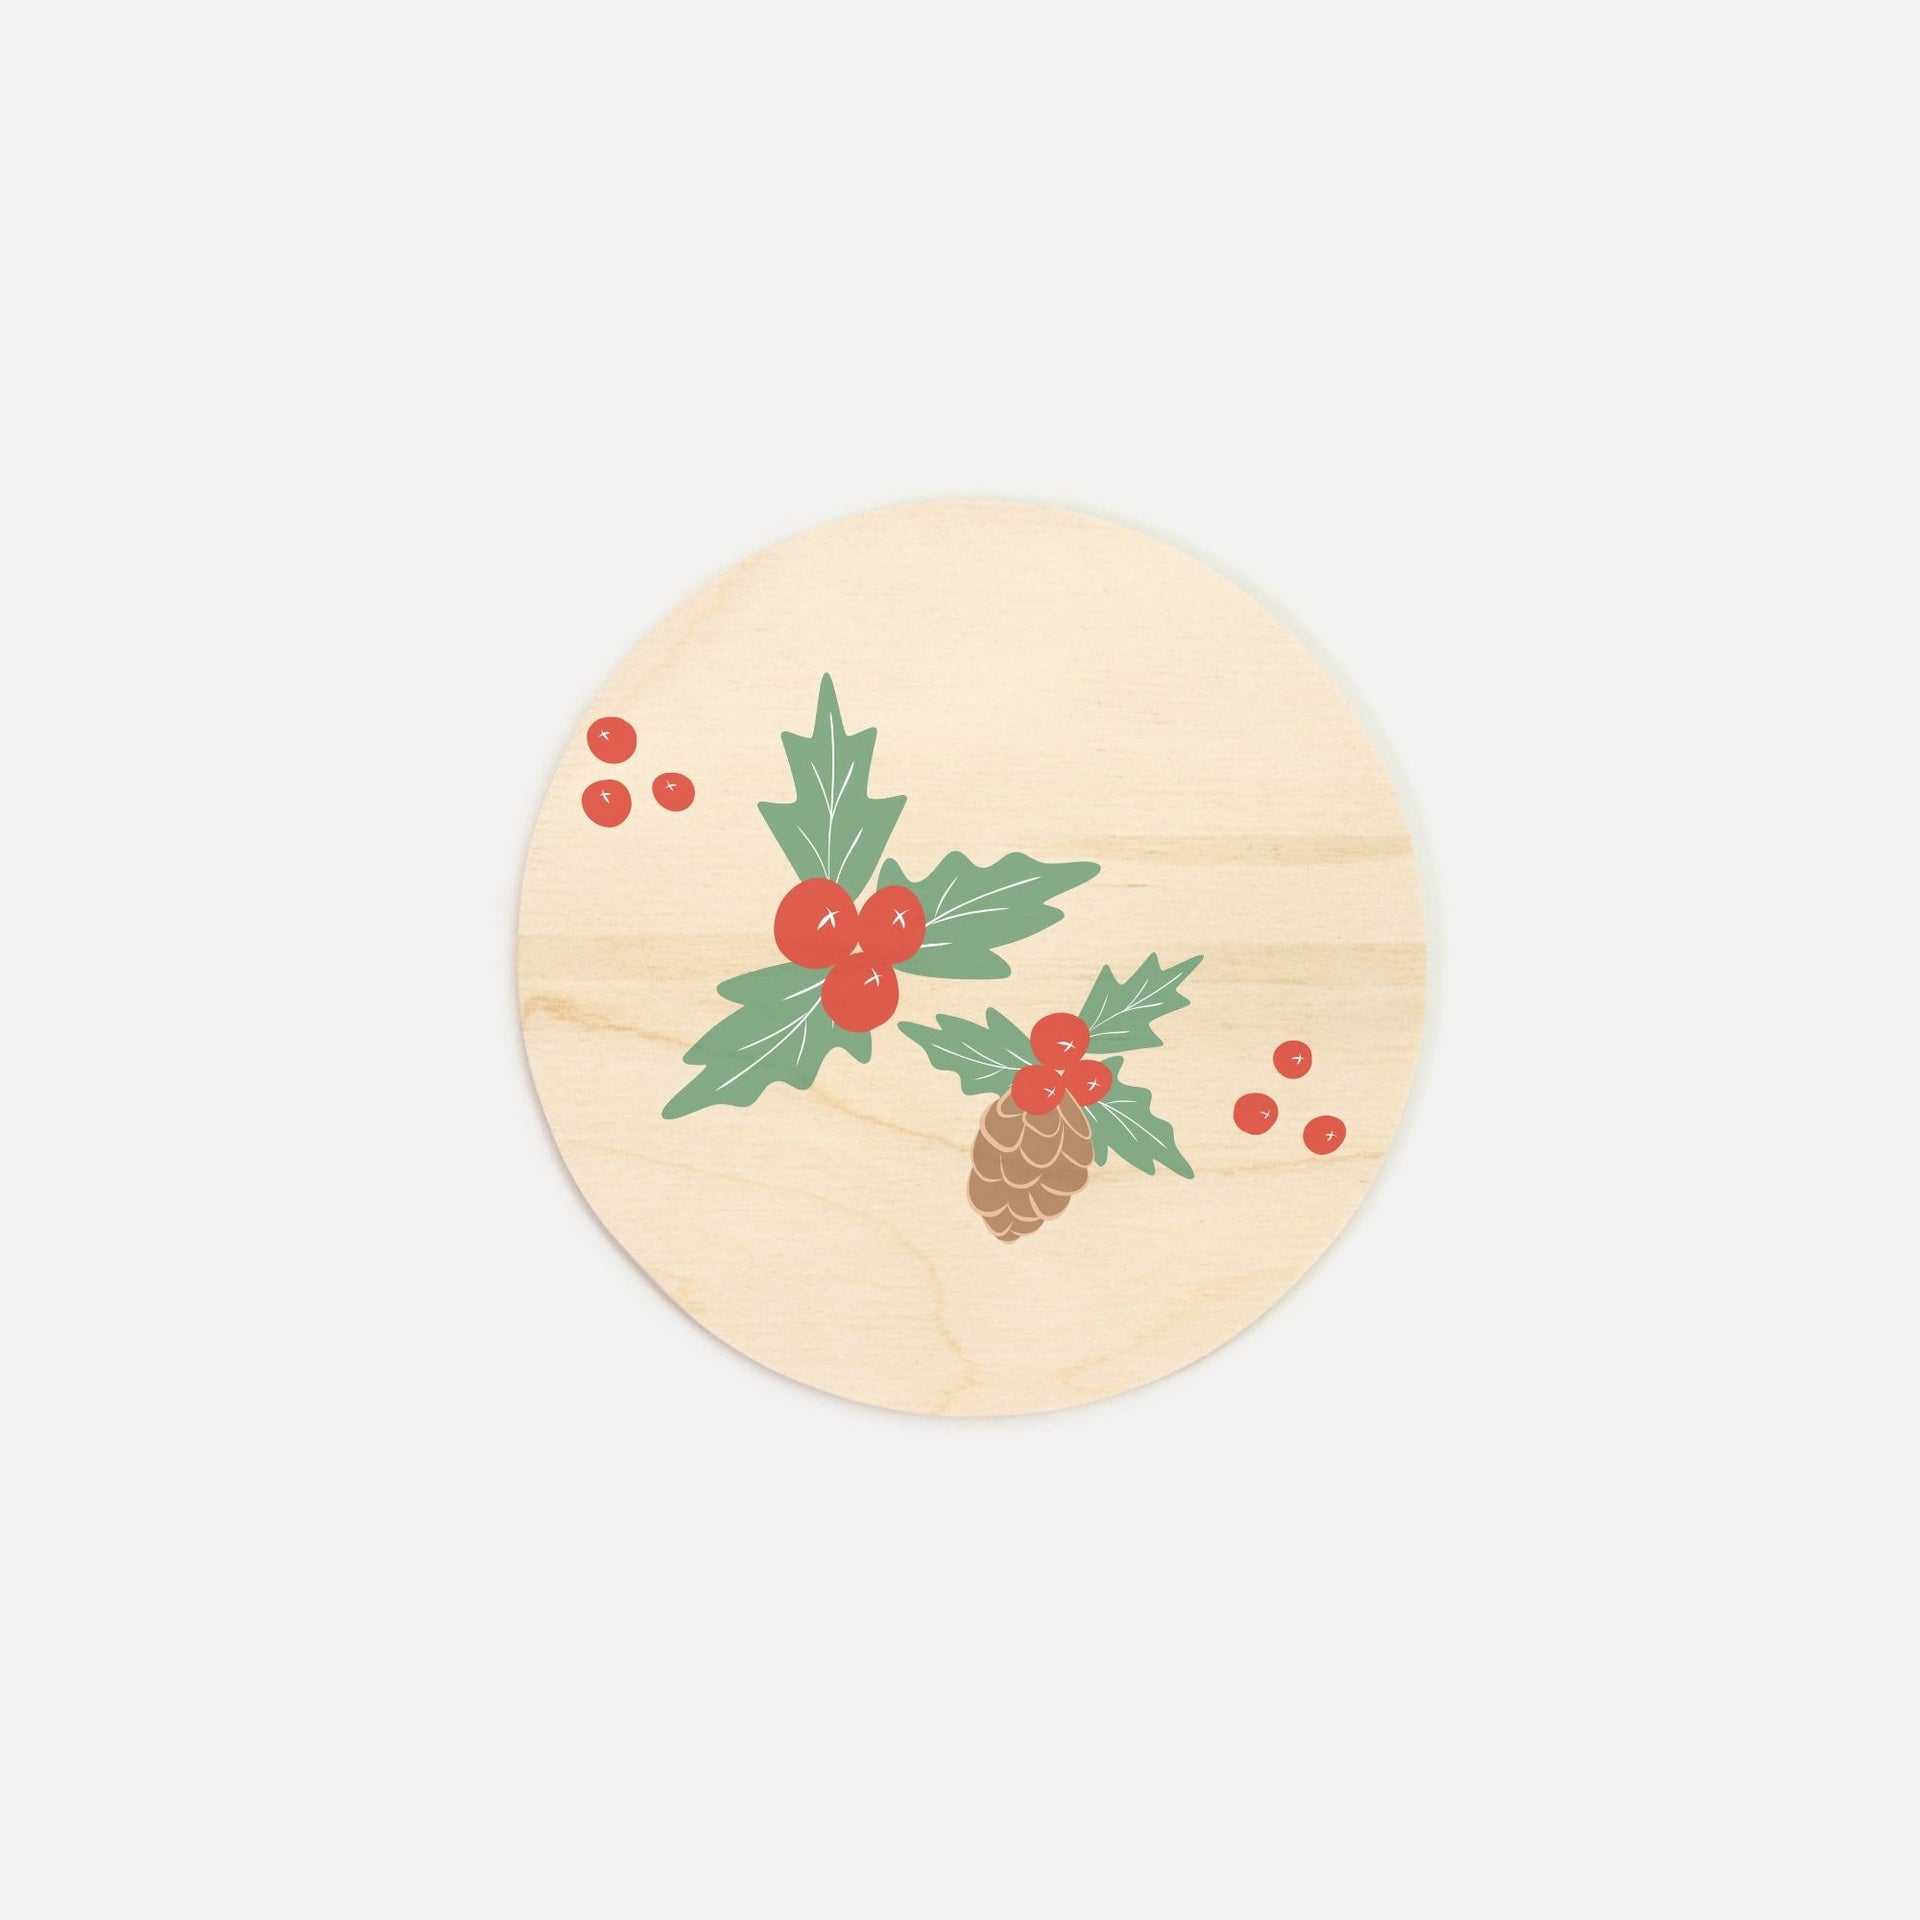 6" Round Wood Sign - Pinecones & Holly